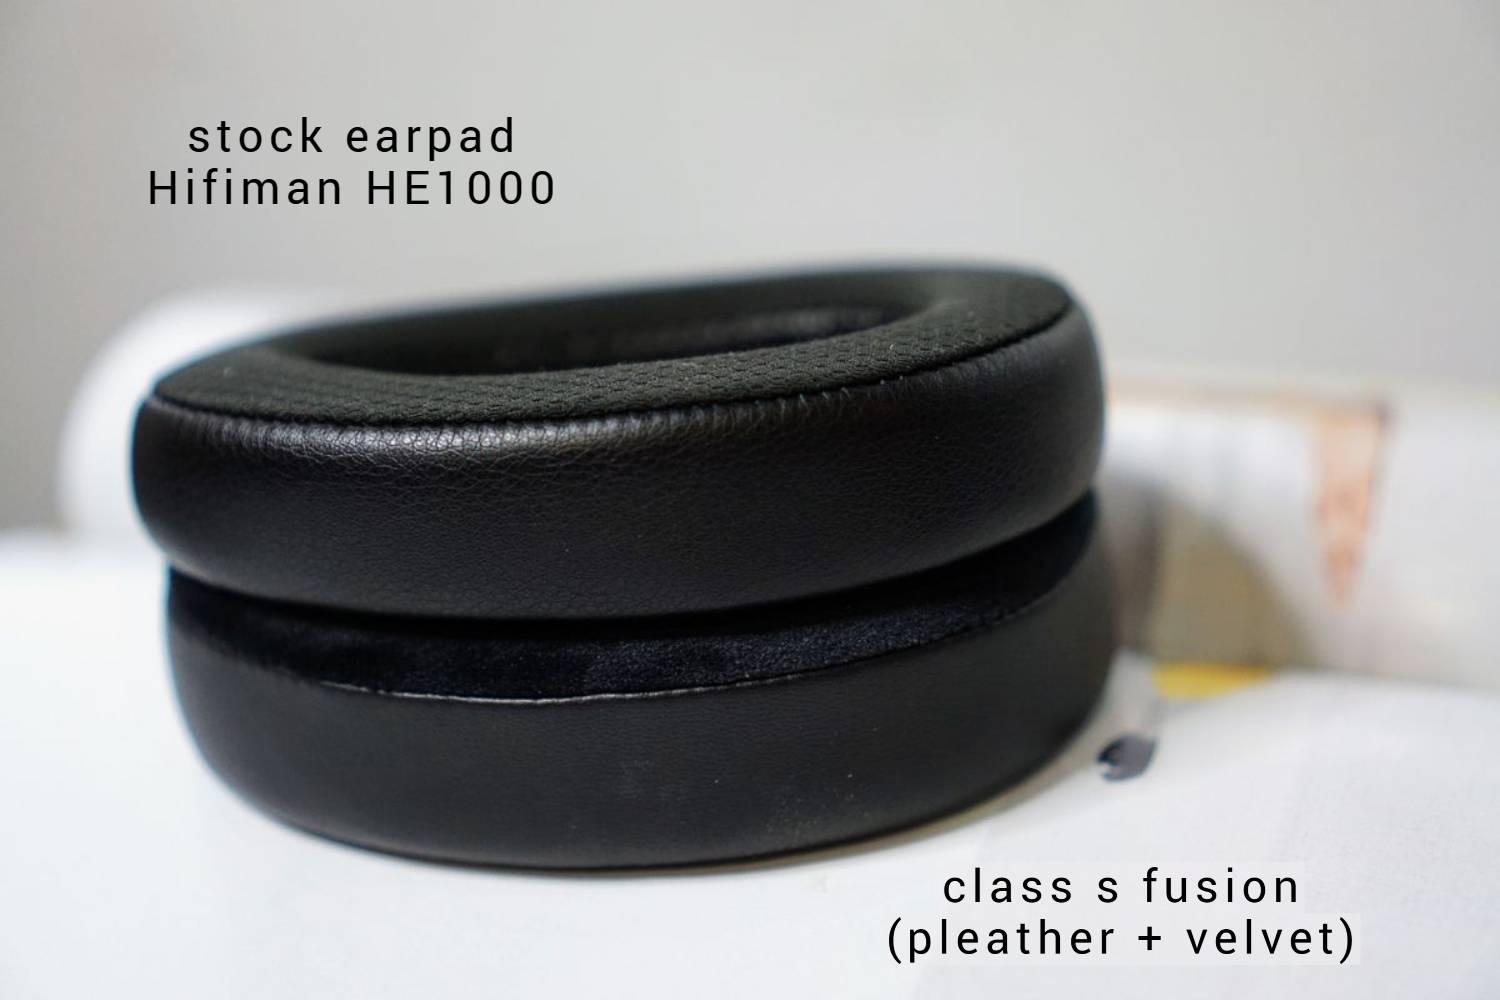 Class S Fusion (Protein Leather+Velvet) aftermarket earpads Hifiman HE1000se Arya Ananda Edition XS (bracket+foam disk)